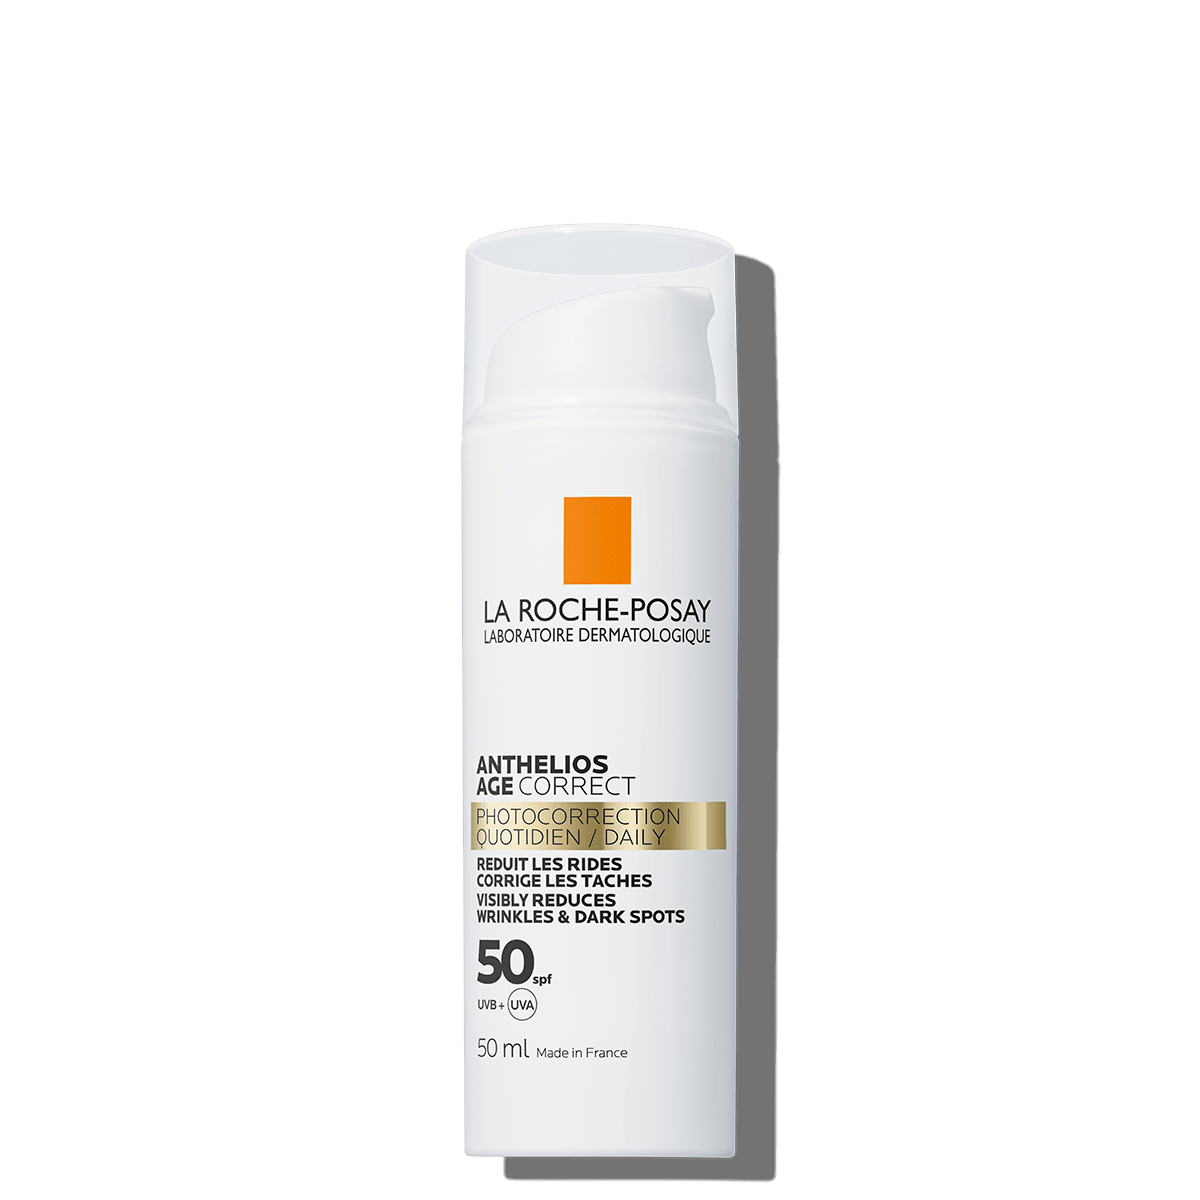 La-Roche-Posay-Anthelios-Age-Correct-SPF50-50ml-NoTeinted